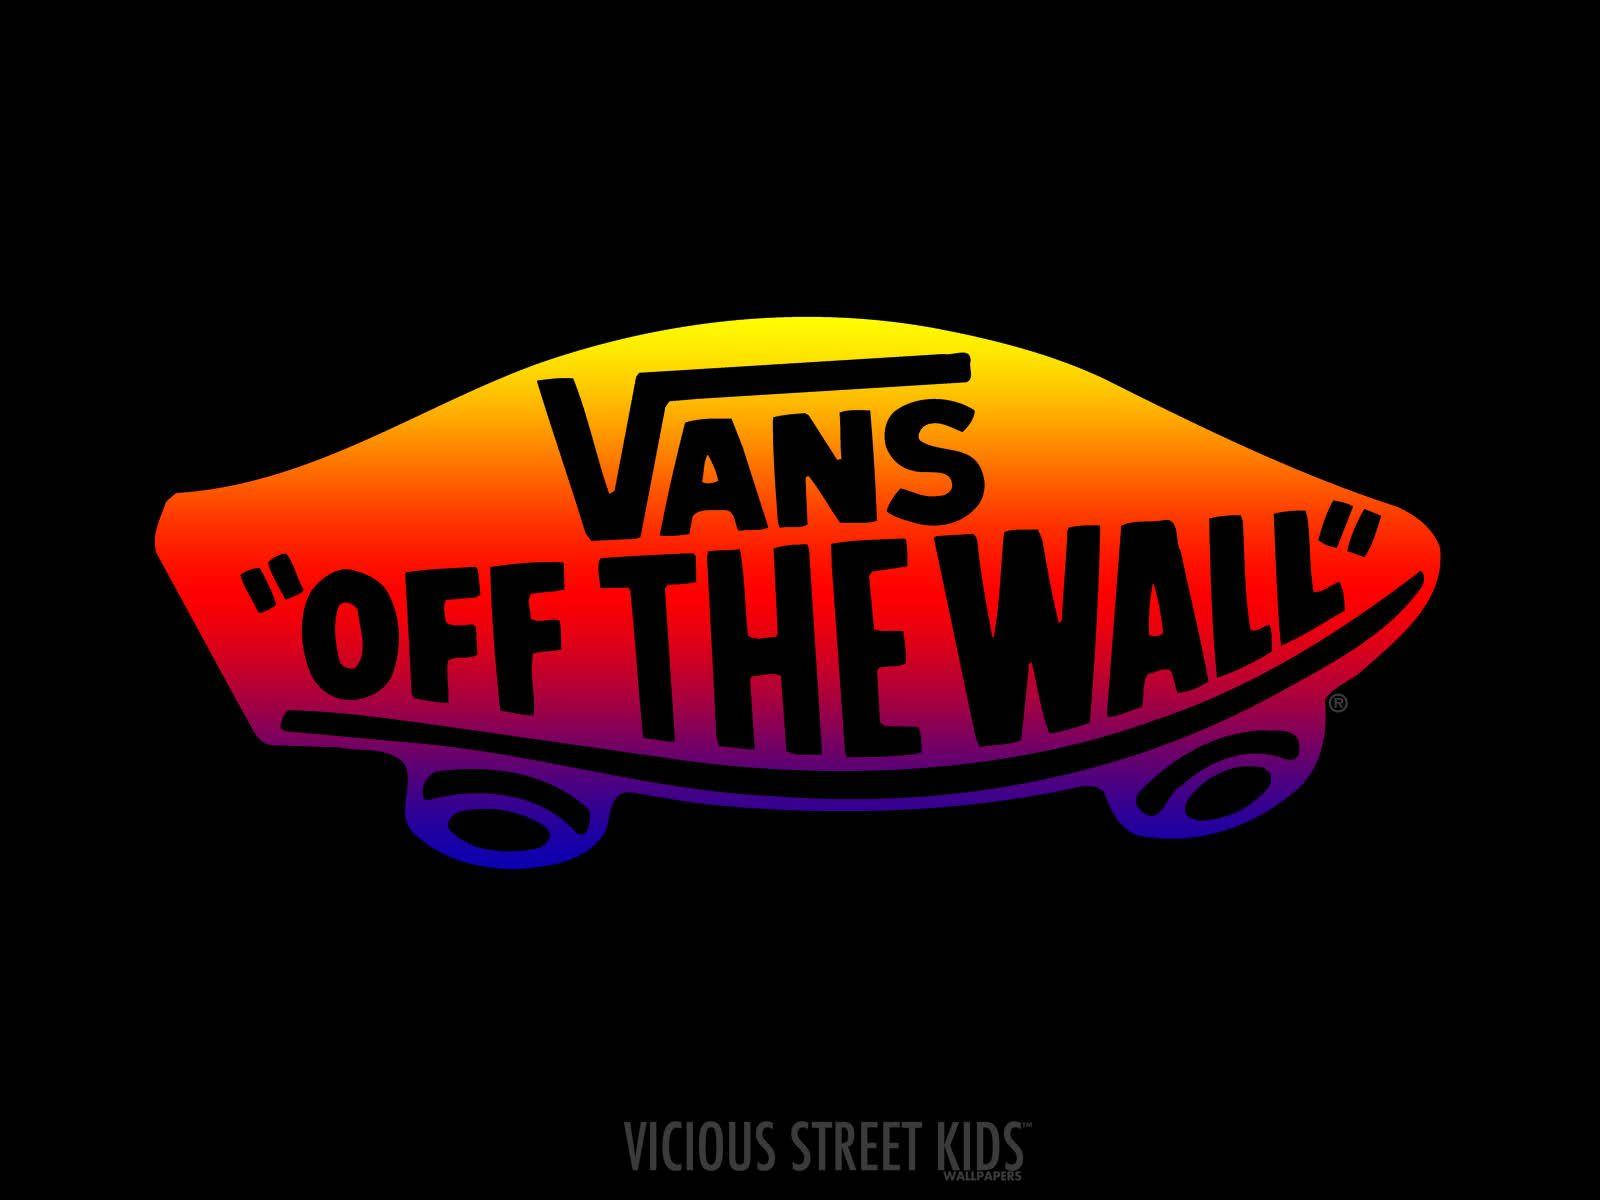 The Colorful Vans Off The Wall Logo: A Symbol Of Infinite Possibilities